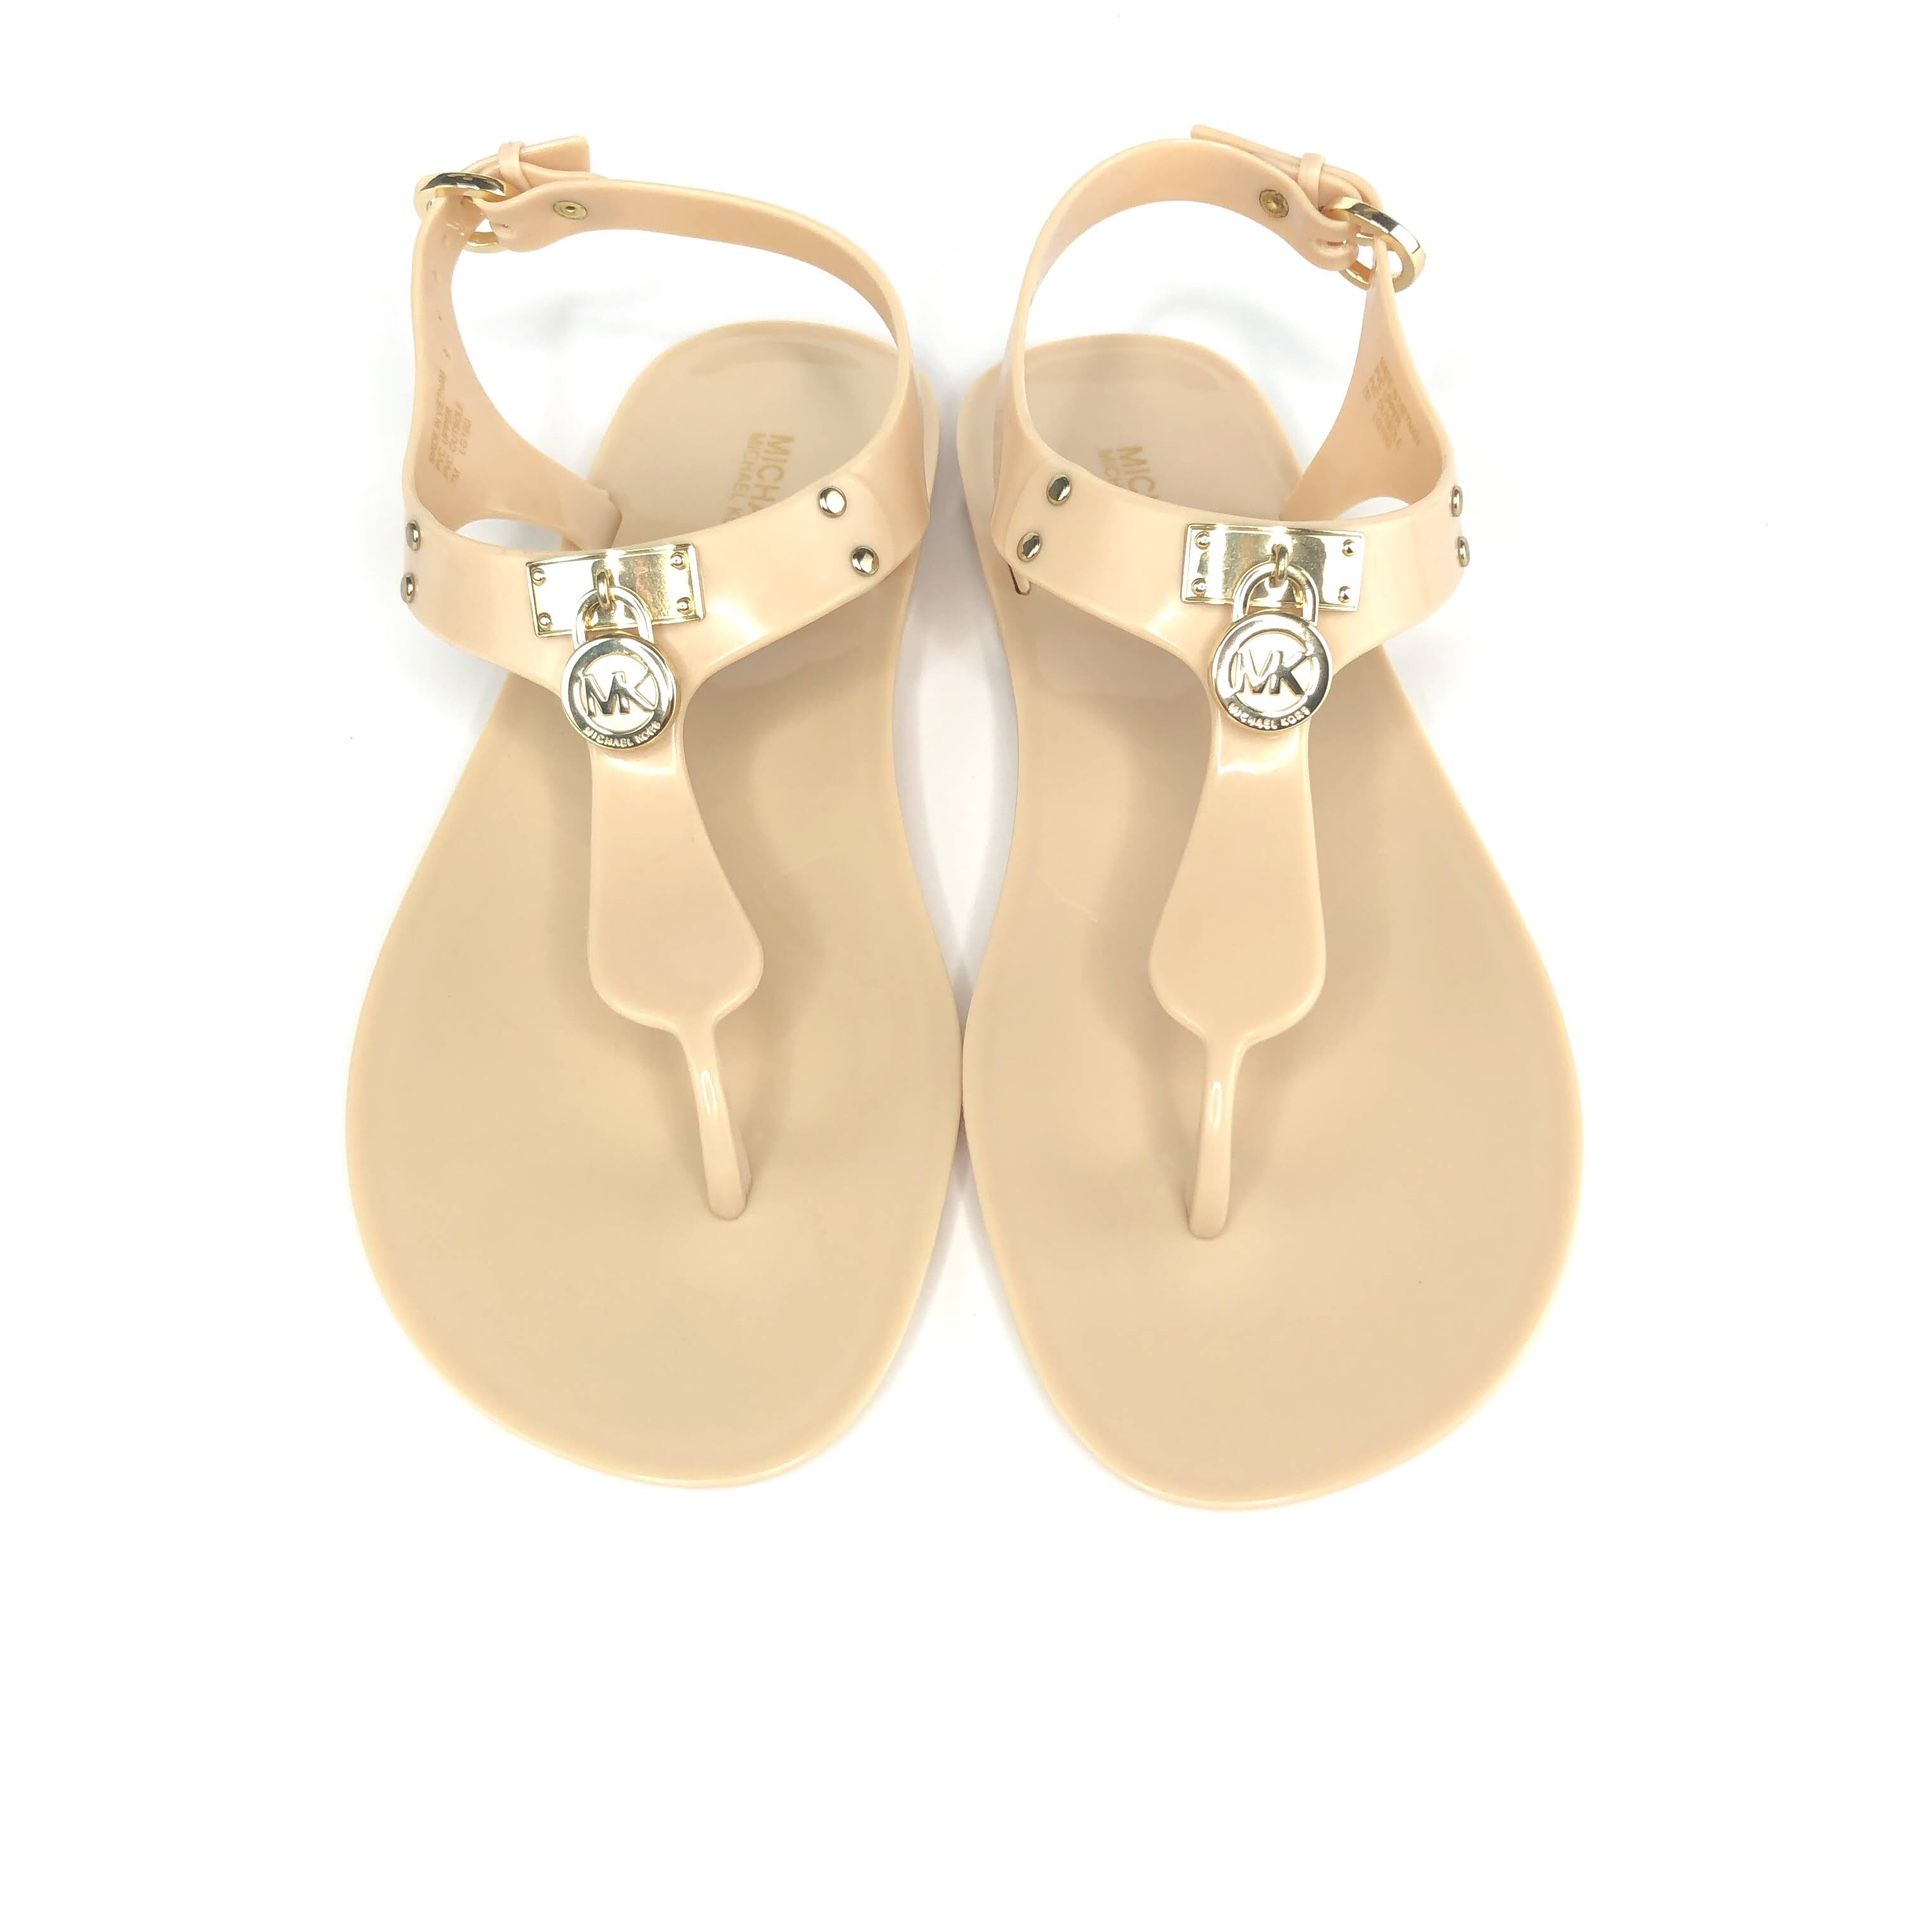 Michael Kors PVC Jelly Thong Sandals Nude Size 11 Gold Hardware New In Box NIB